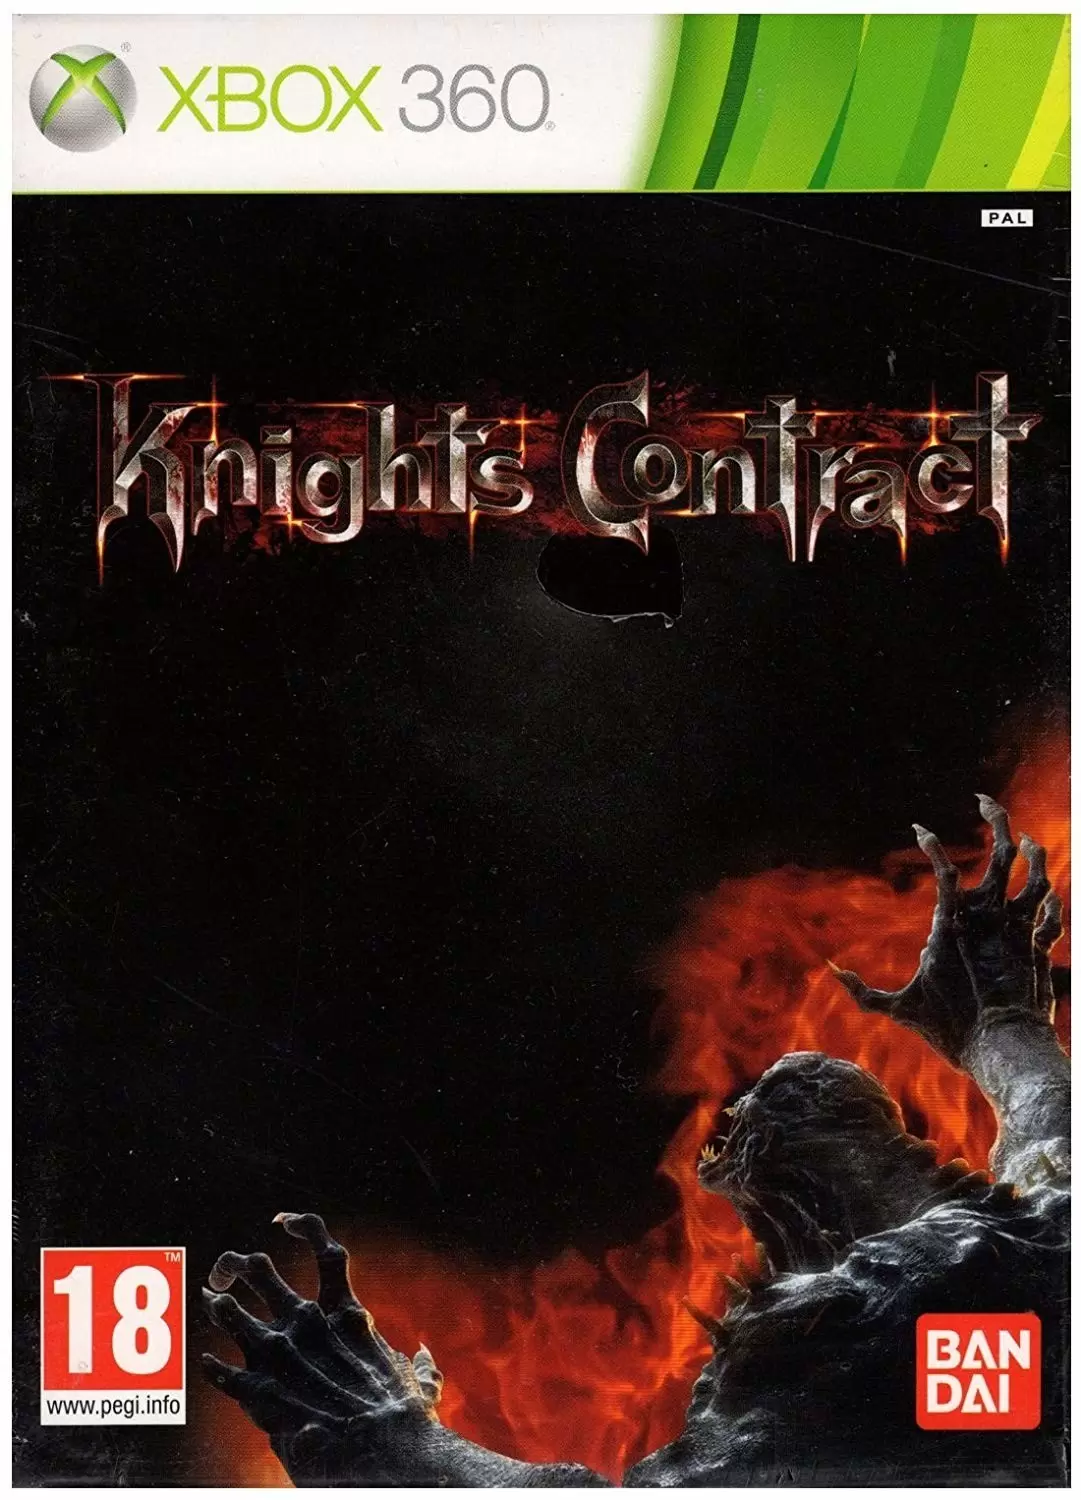 XBOX 360 Games - Knights Contract